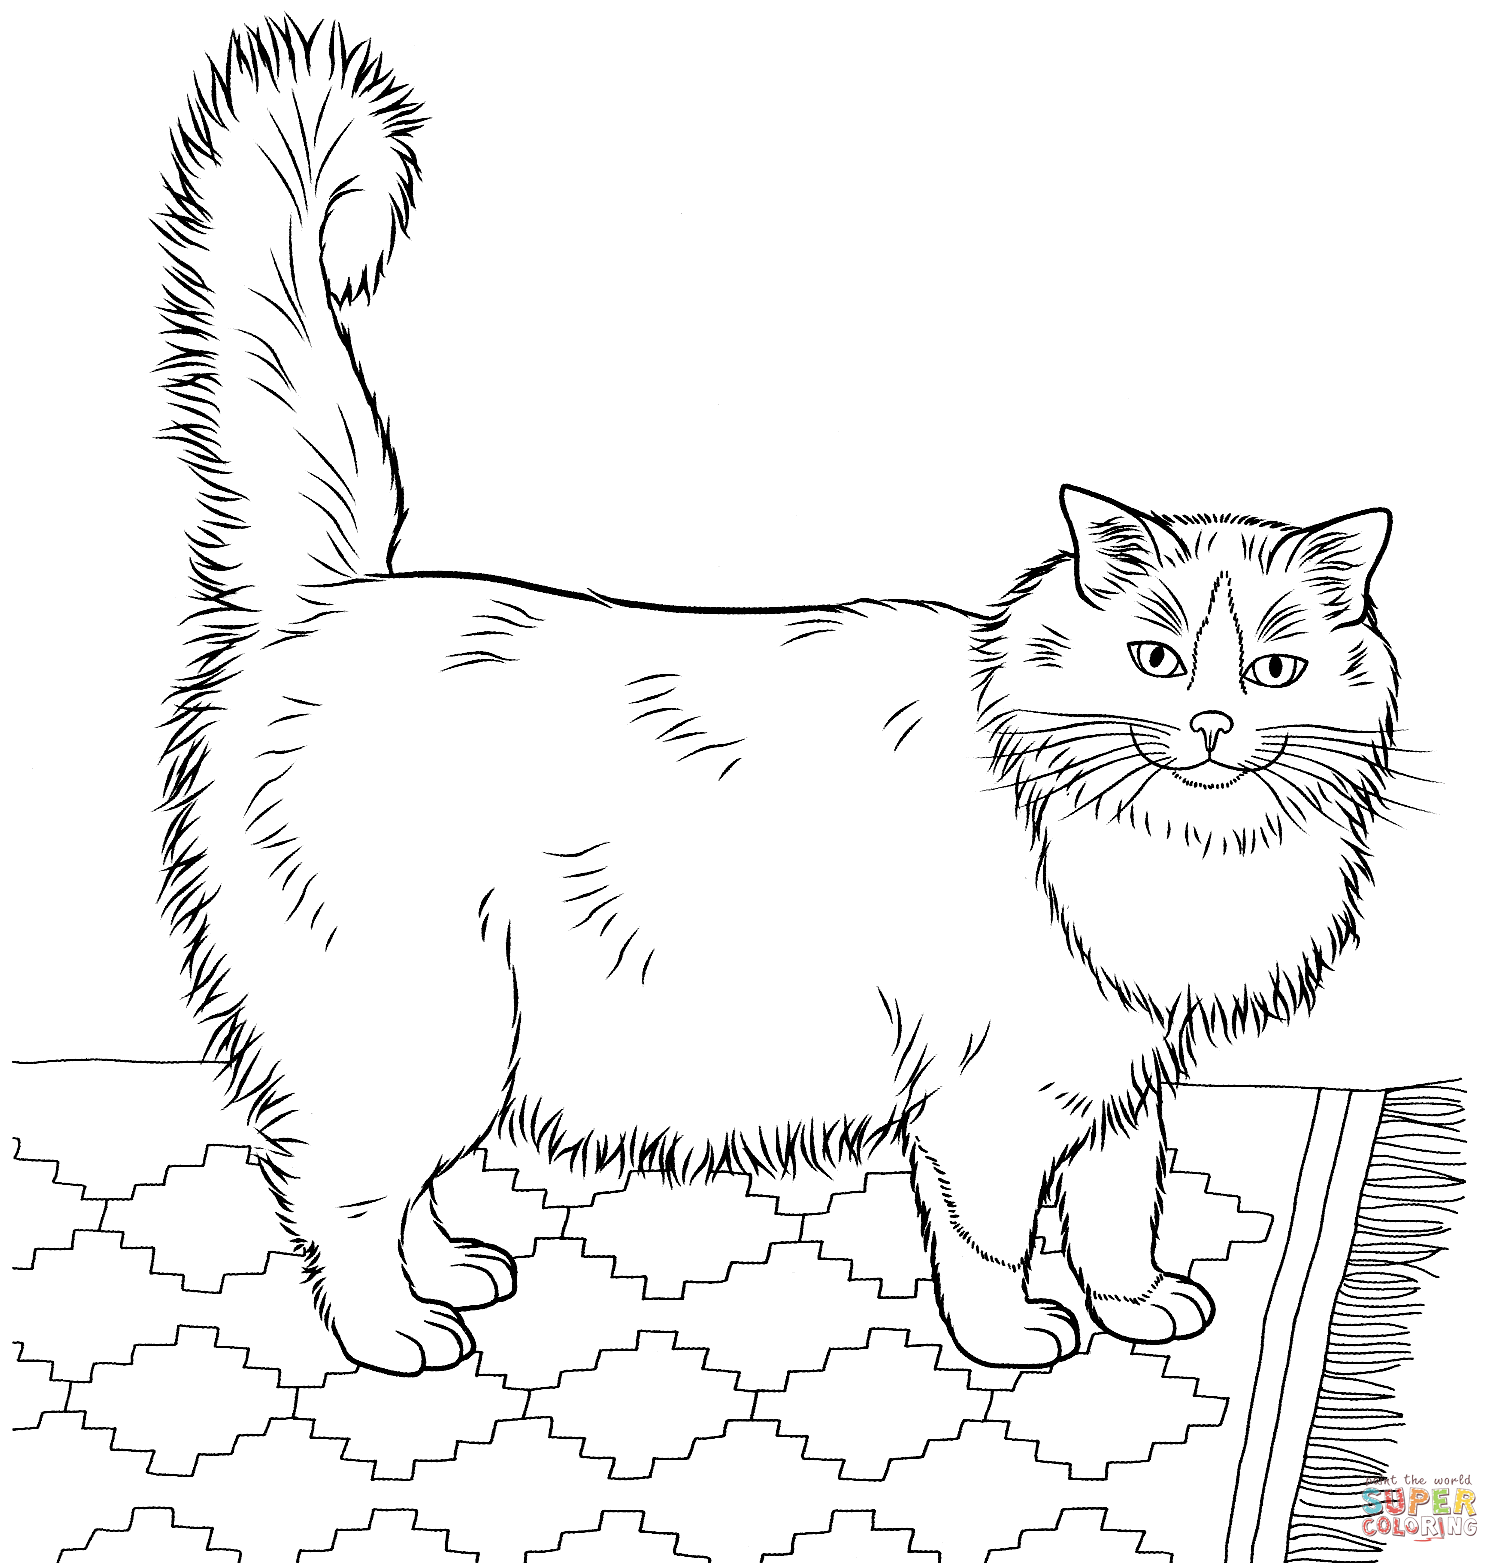 Ragdoll Cat coloring page | Free Printable Coloring Pages